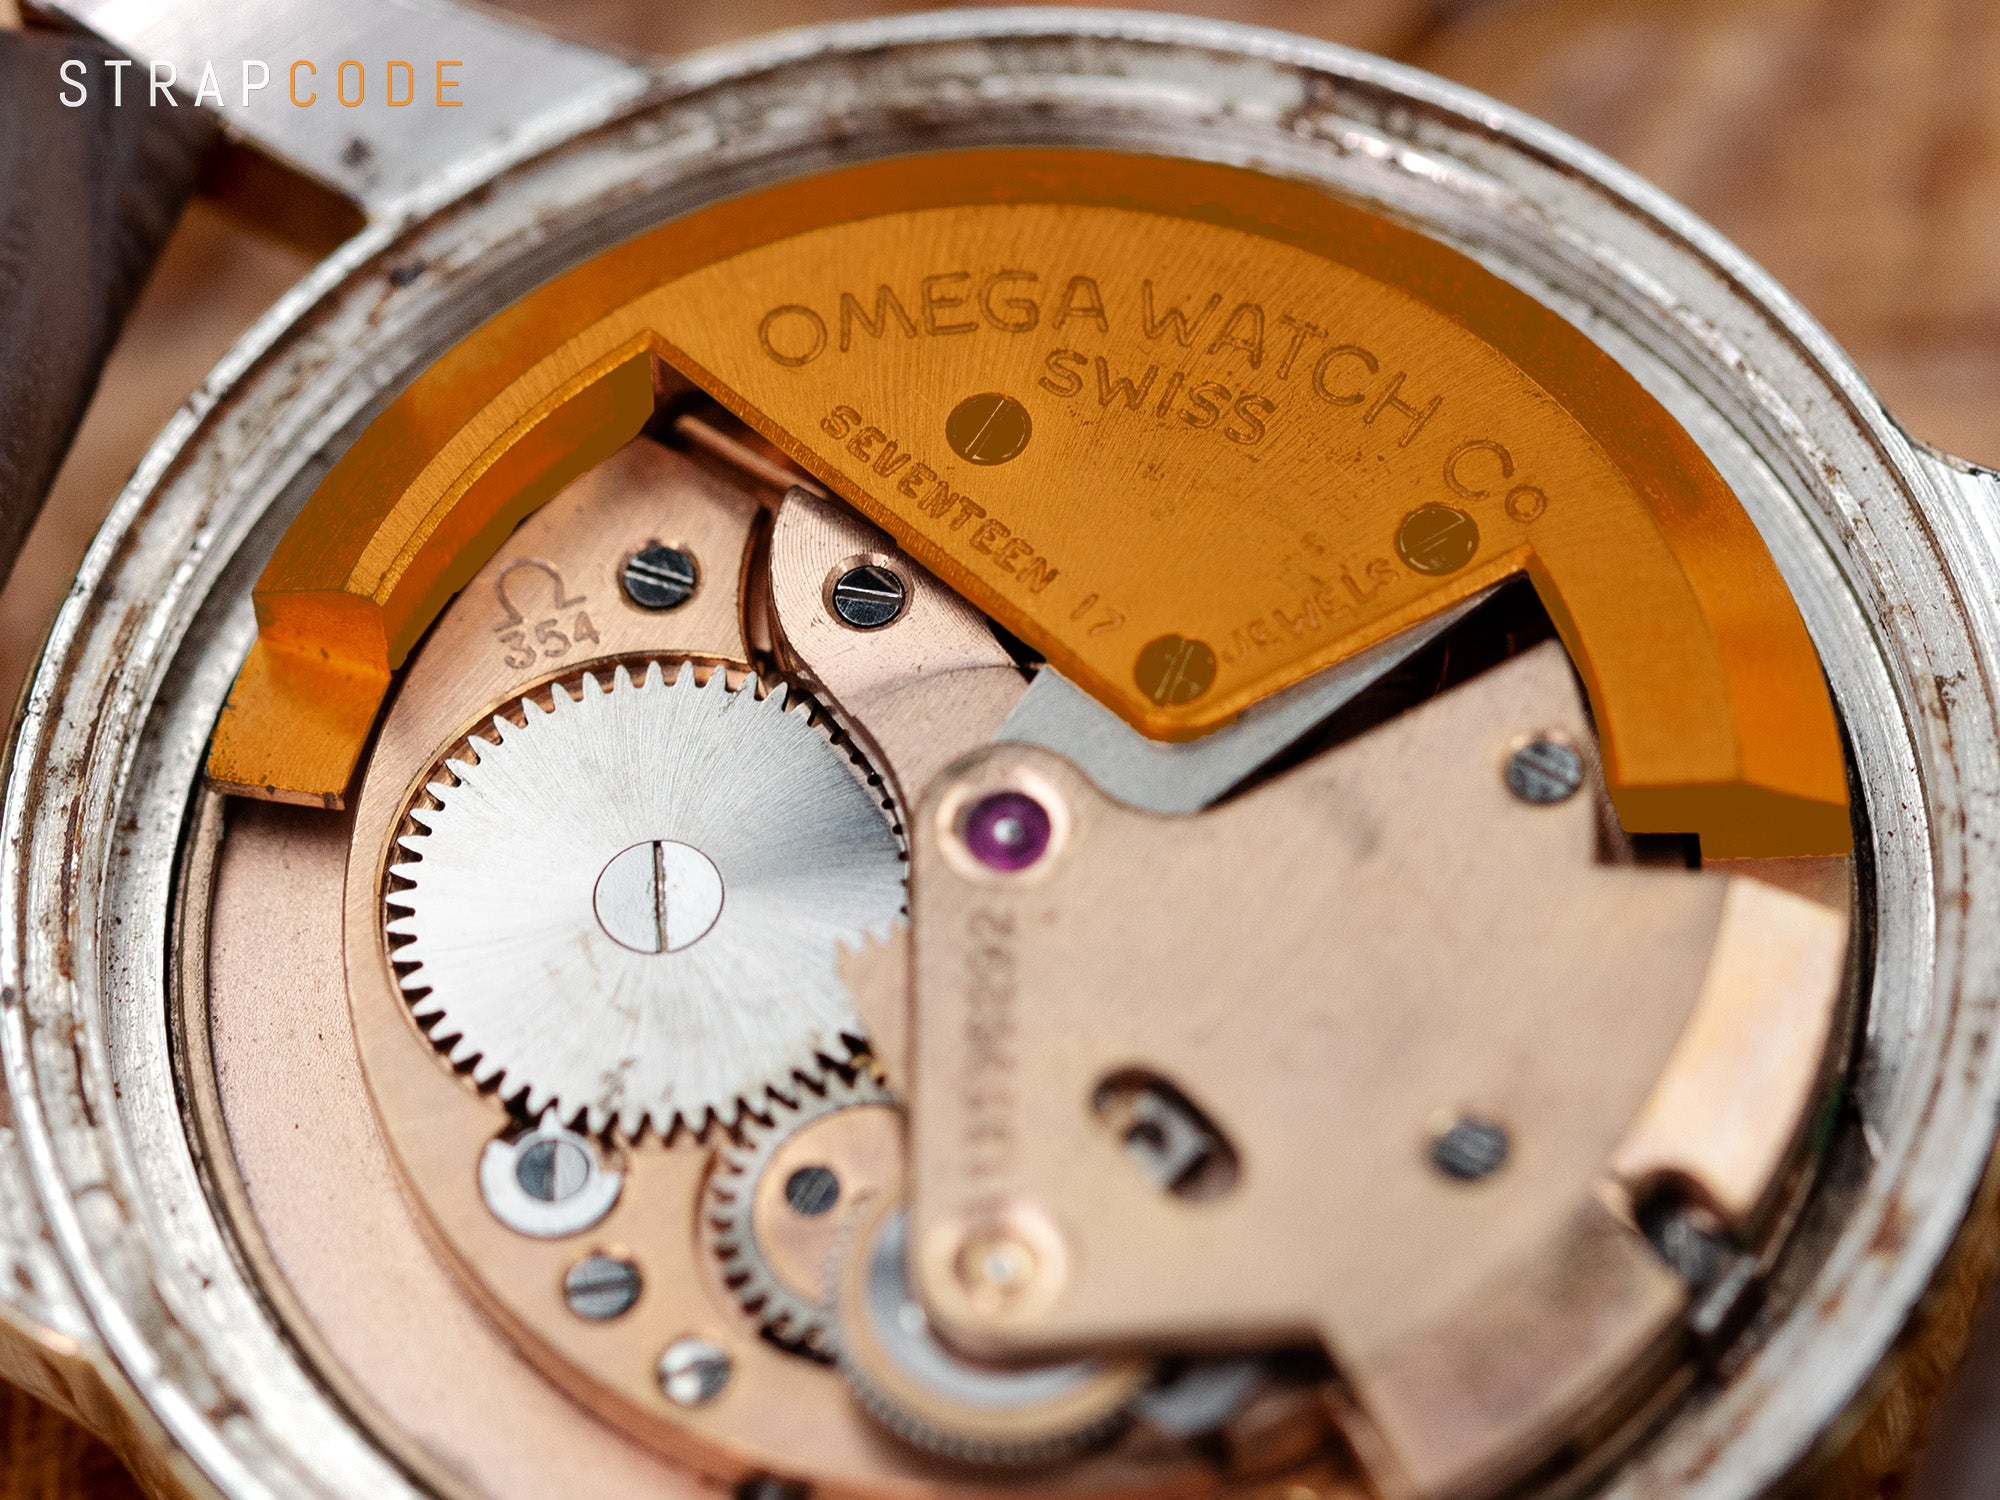 The image features the vintage Omega Seamaster with a bumper rotor on 354 caliber